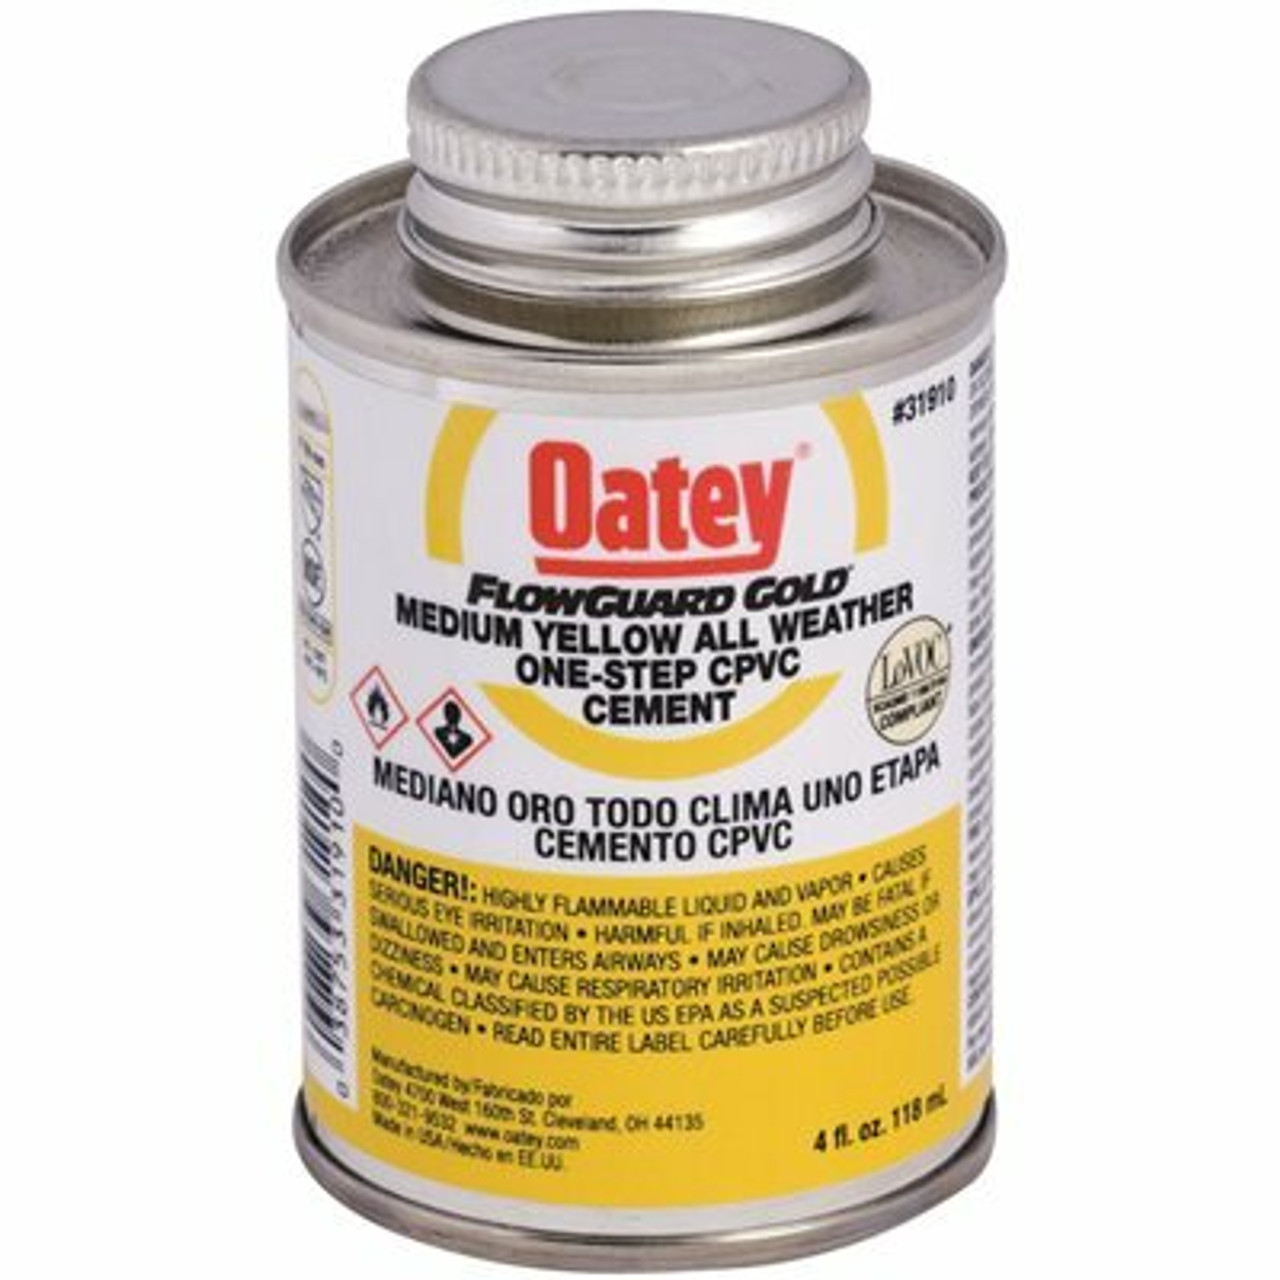 Oatey Flowguard Gold One-Step 4 Oz. Medium Yellow All-Weather Cpvc Cement